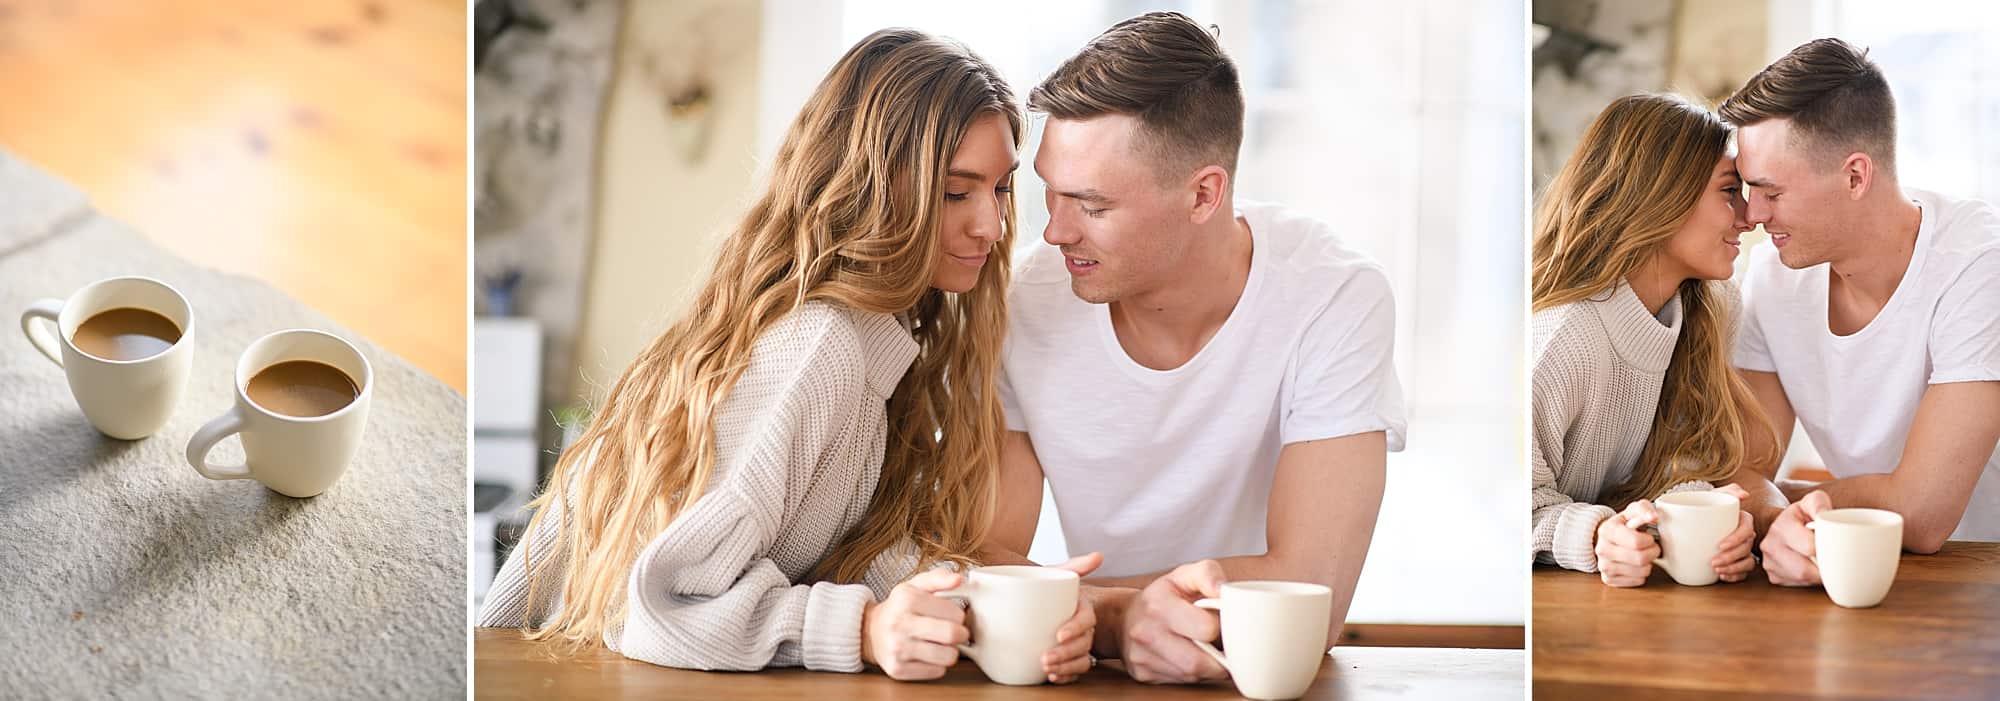 engaged couple enjoying coffee together during their lifestyle session